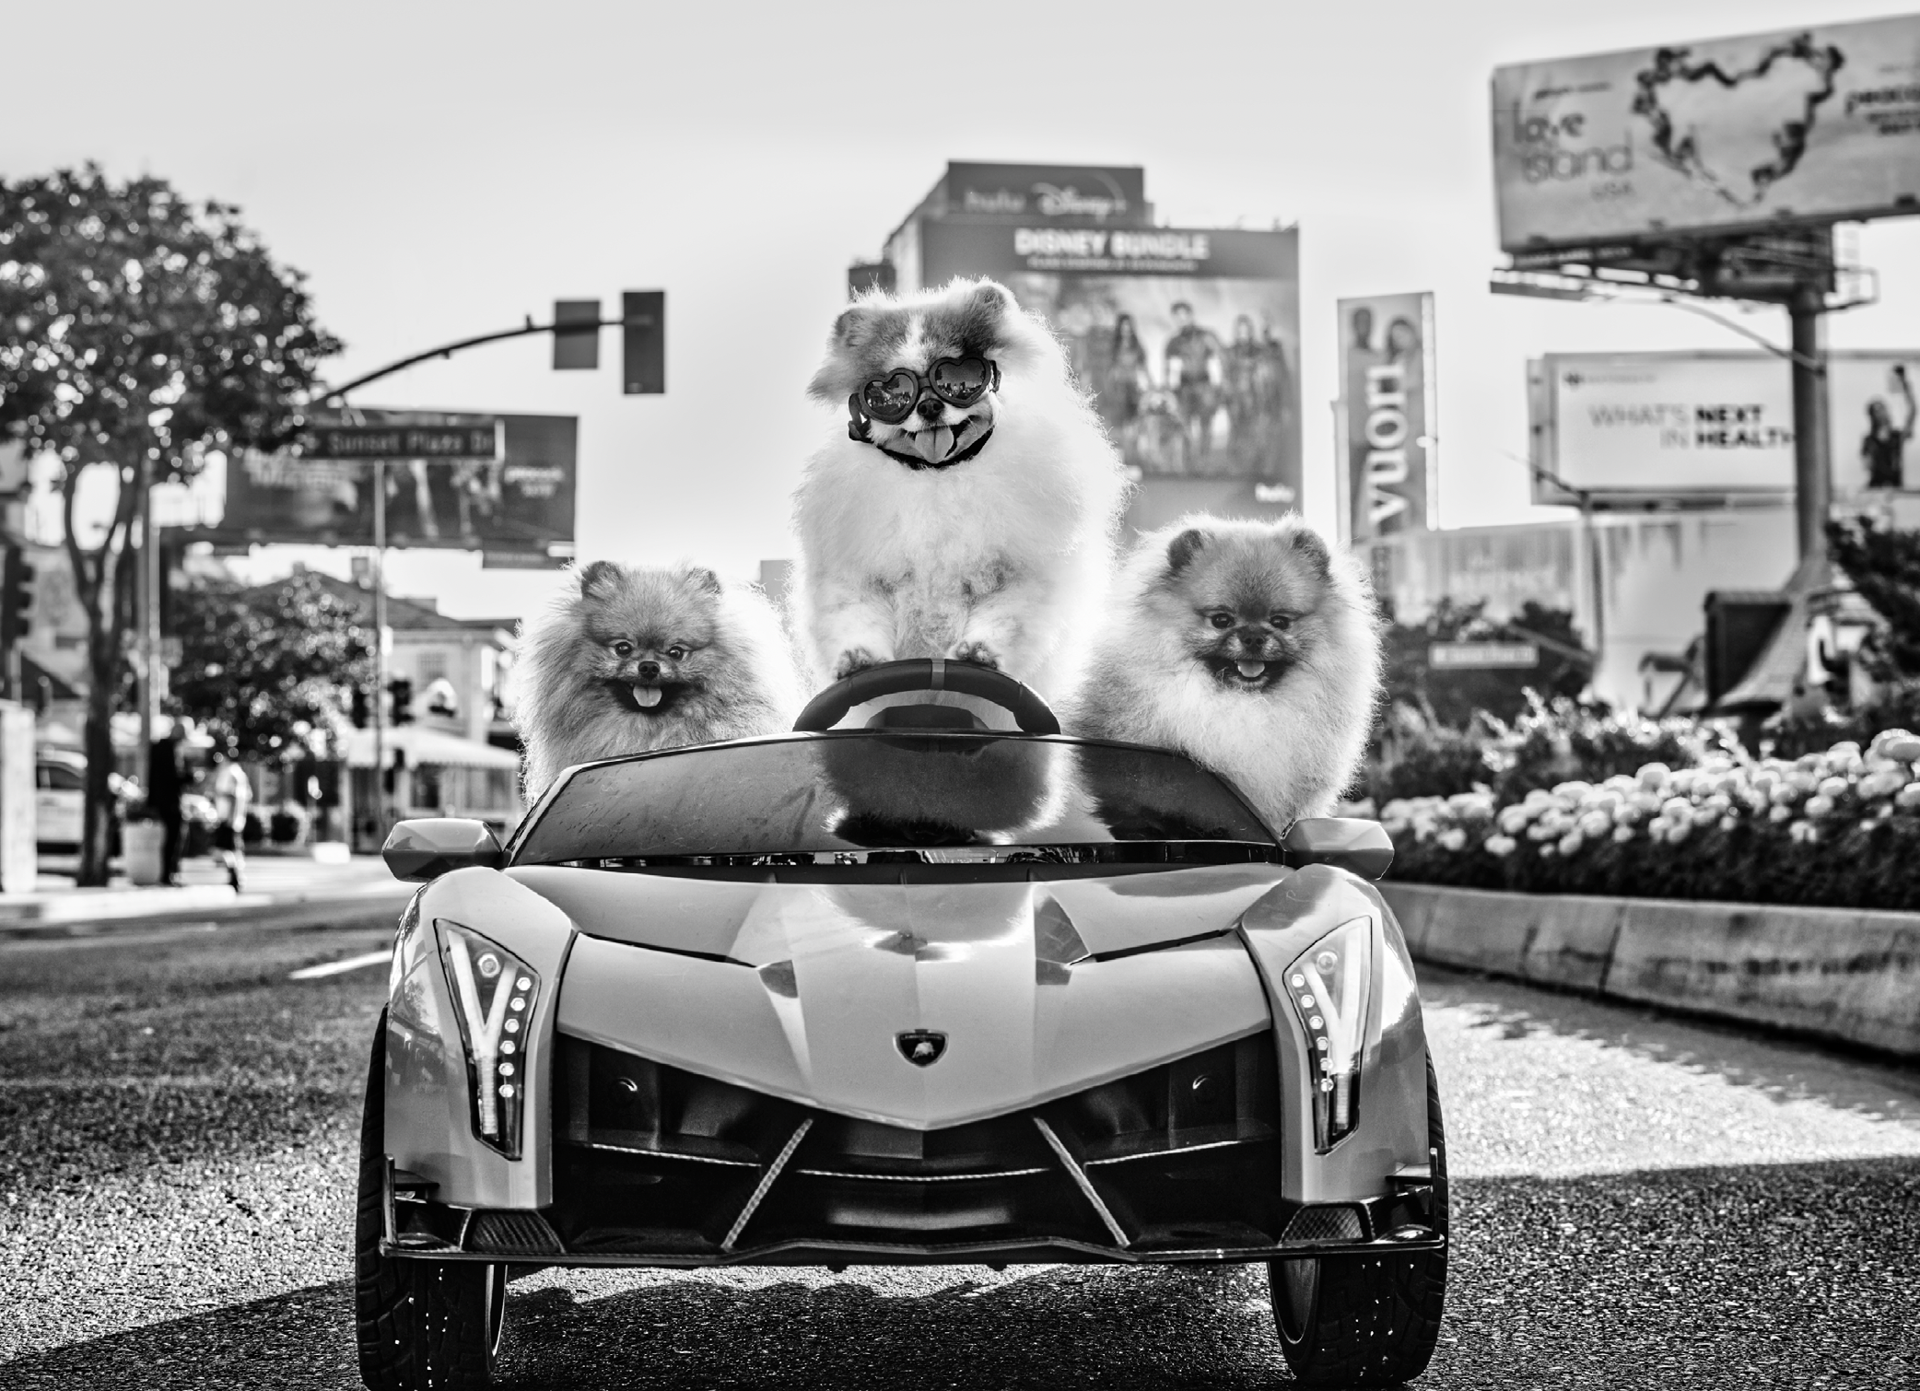 Who Let the Dogs Out? by David Yarrow